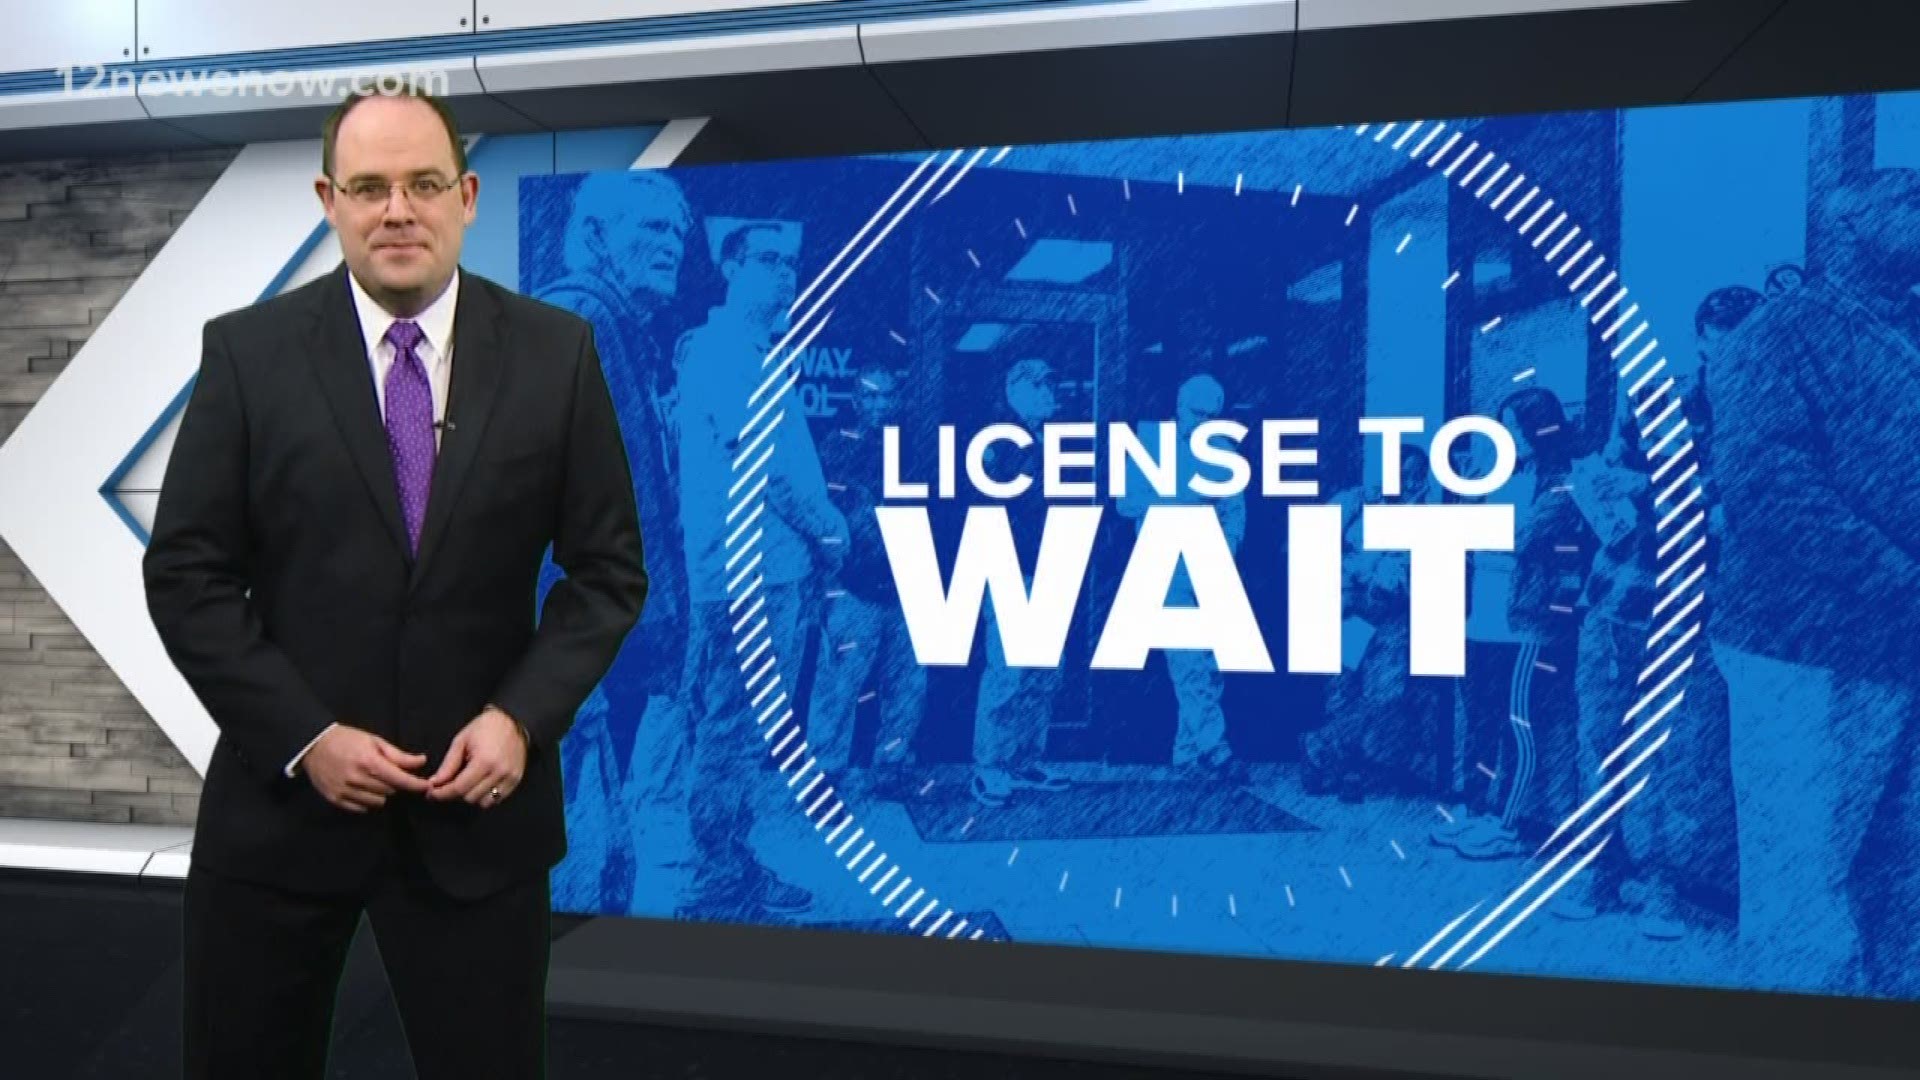 LICENSE TO WAIT: Long lines issue a 'License to Wait' at Texas DPS offices